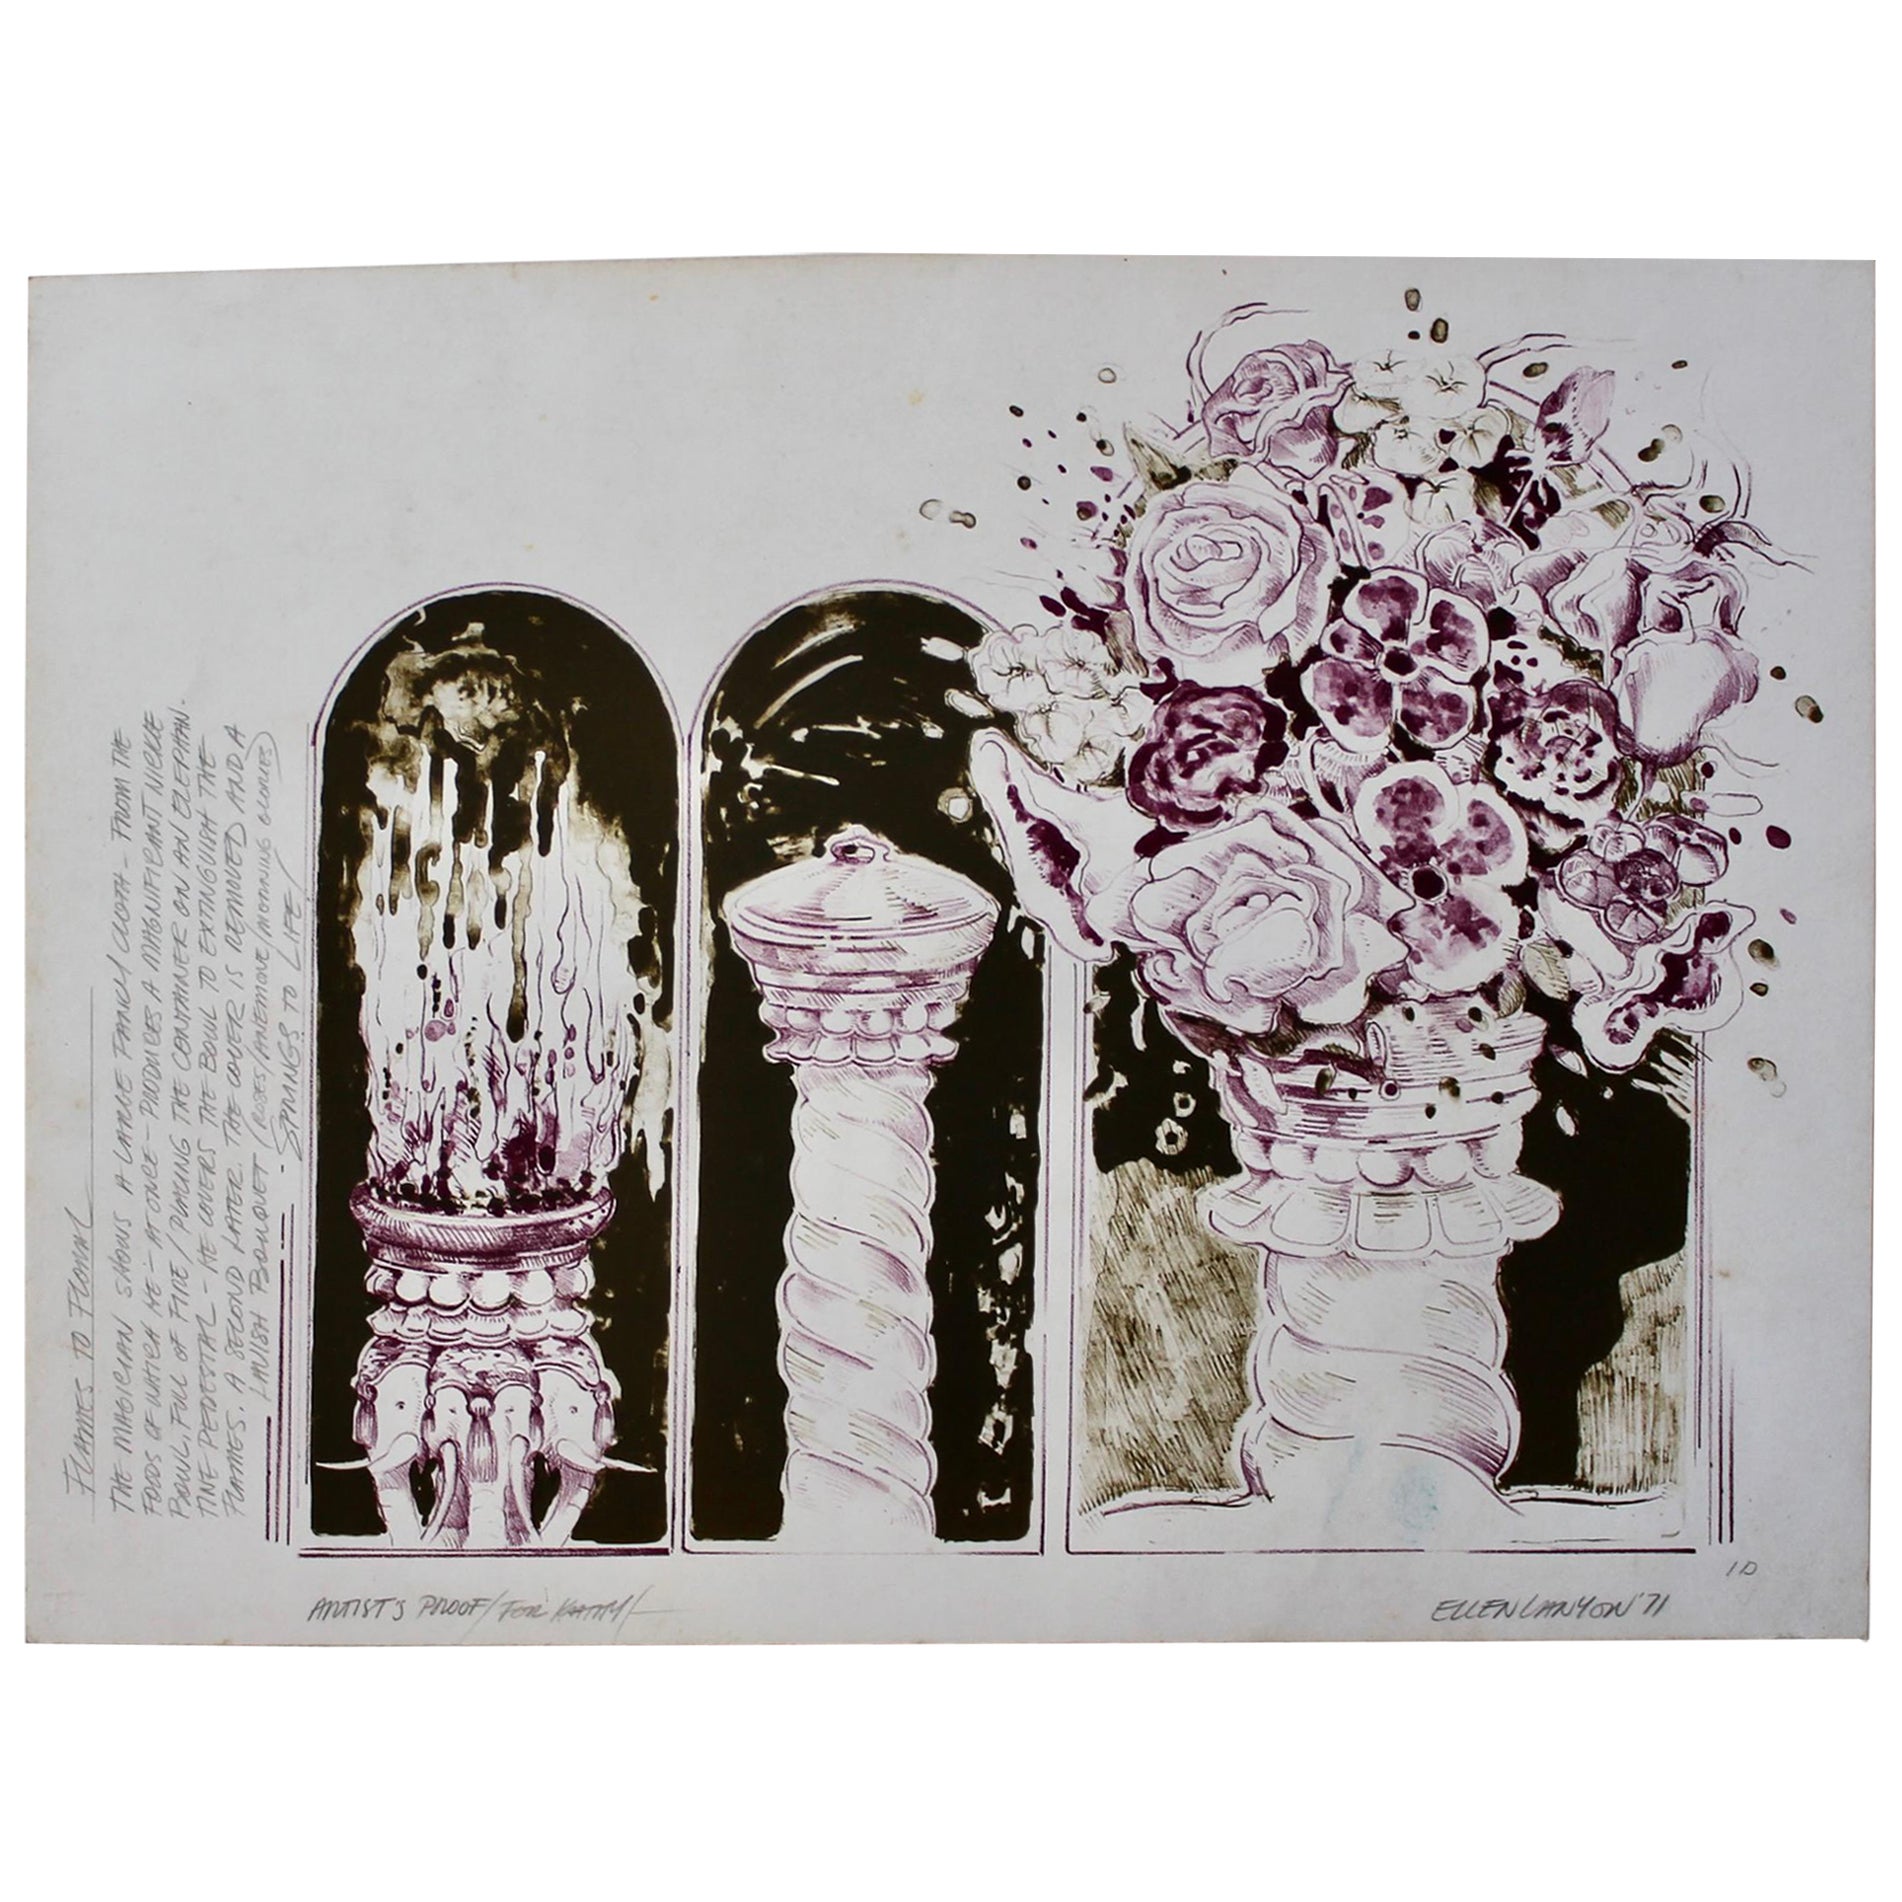 Ellen Lanyon '1926-2013' "Flames to Floral" annotated Landfall Press Lithograph For Sale